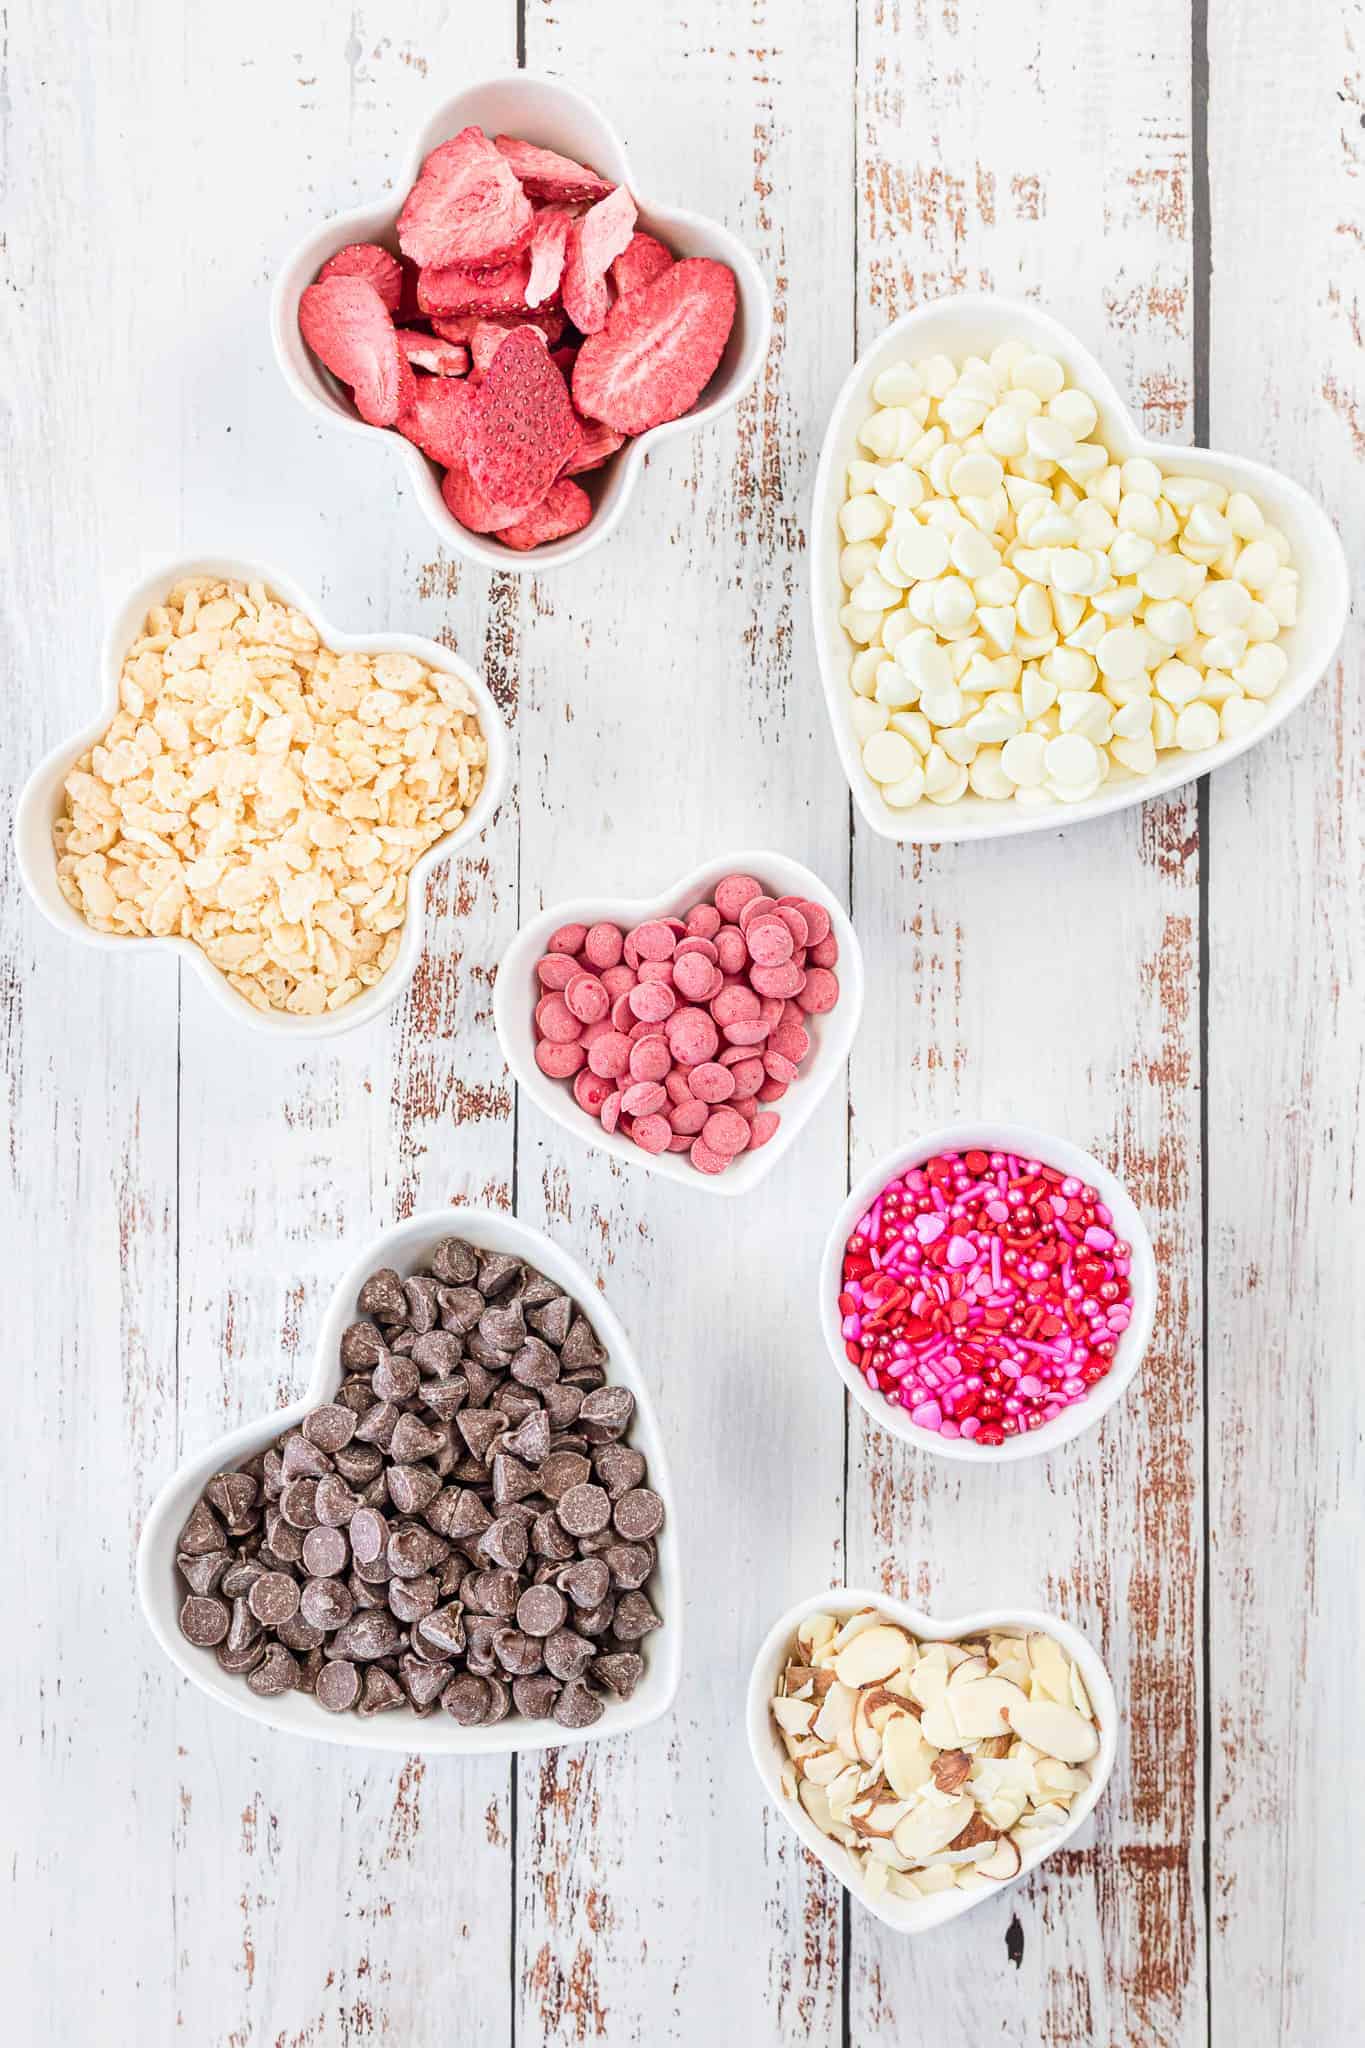 ingredients in heart shaped bowls